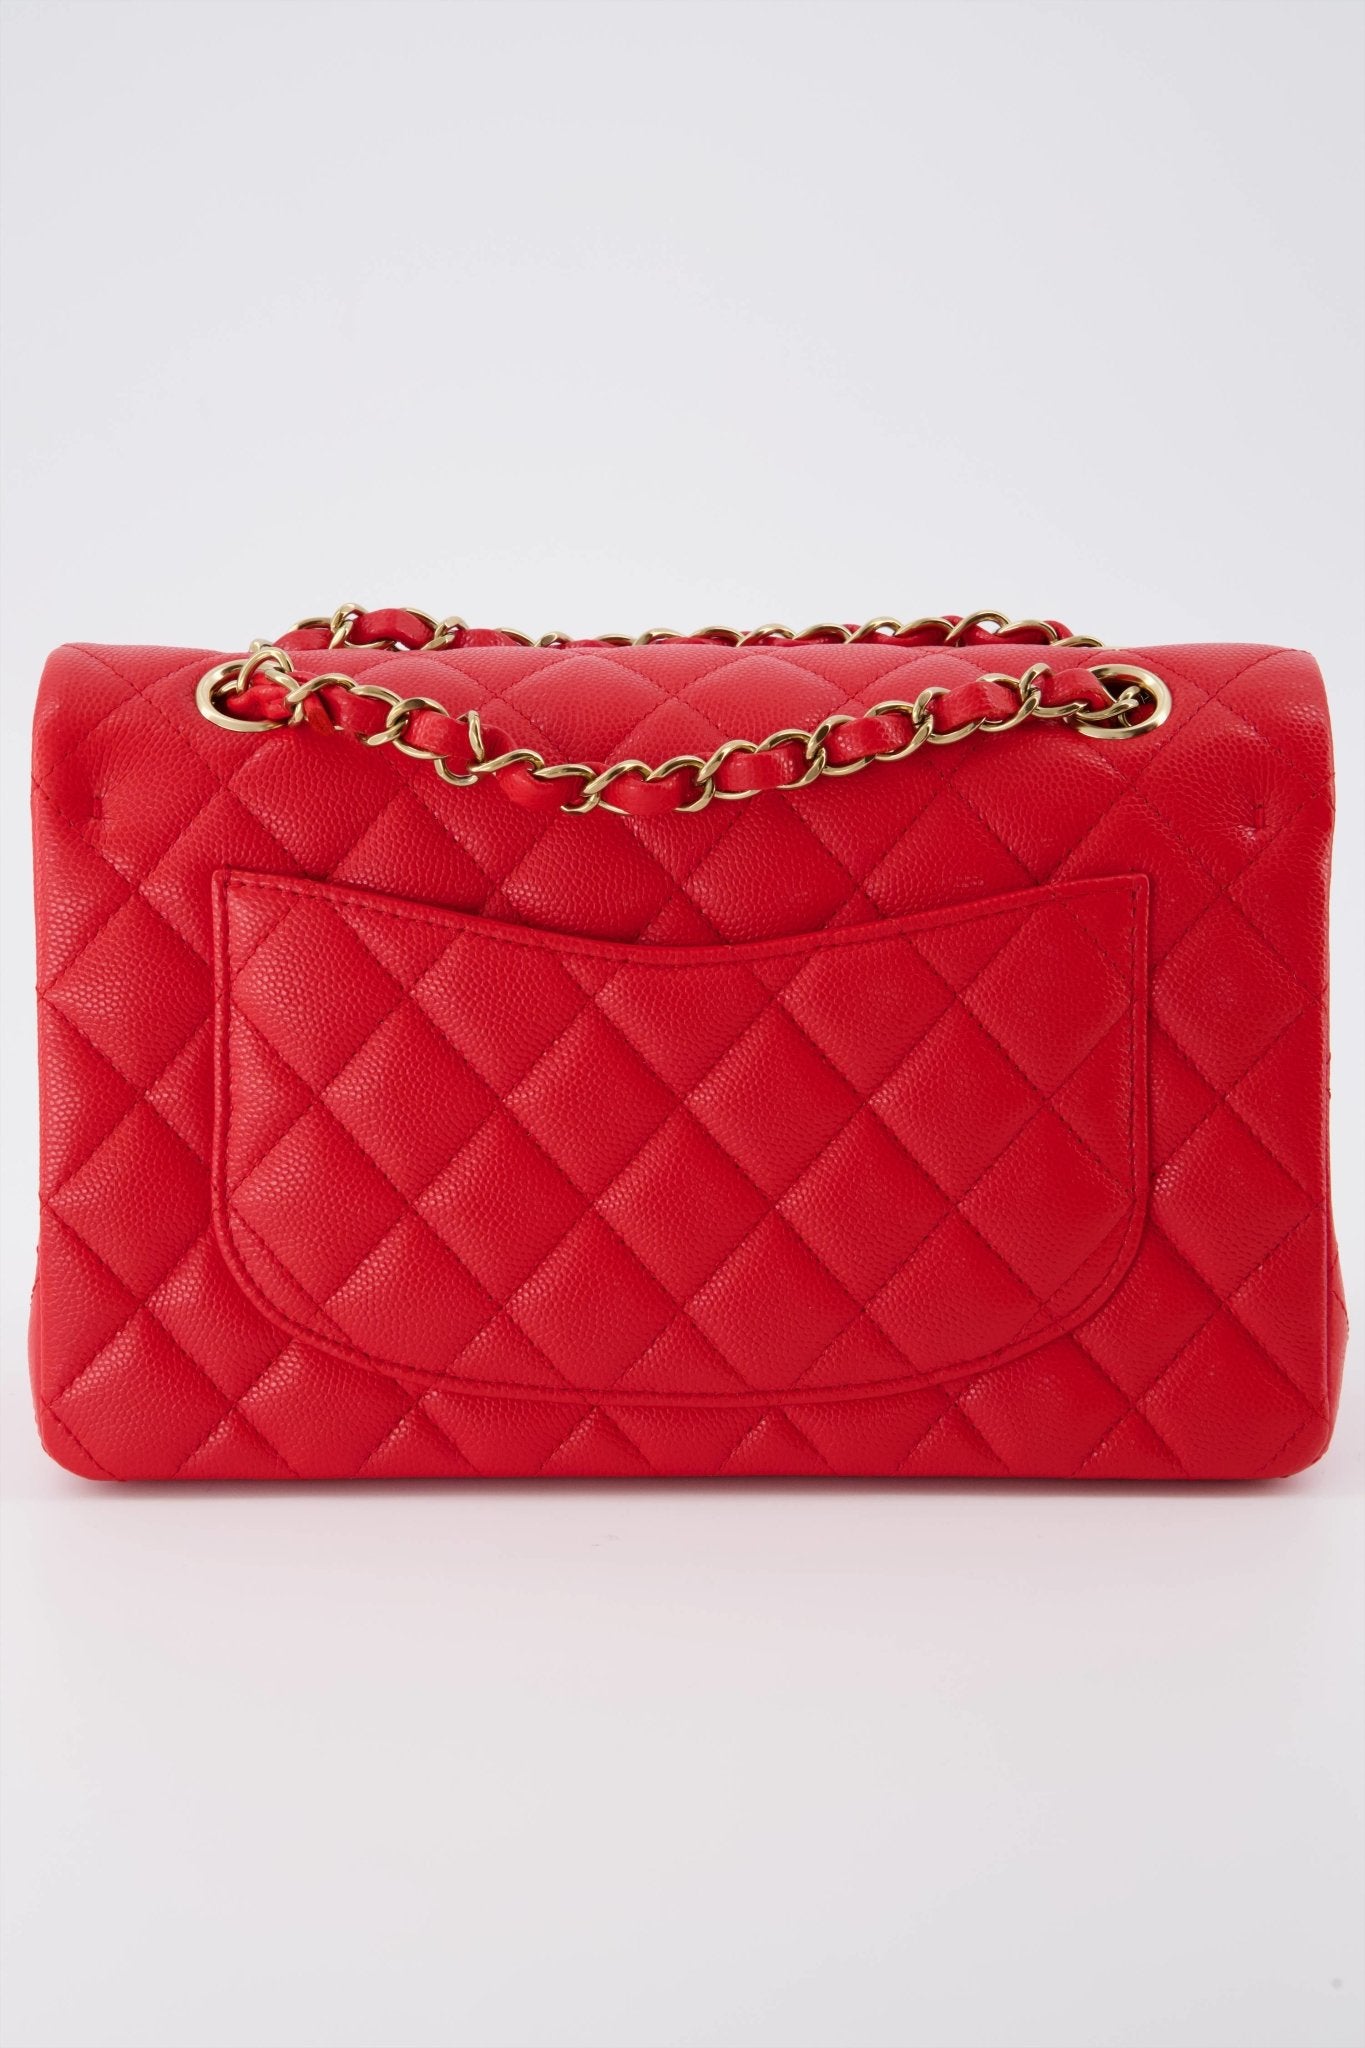 Find out how to buy authentic Chanel Handbags on Amazon